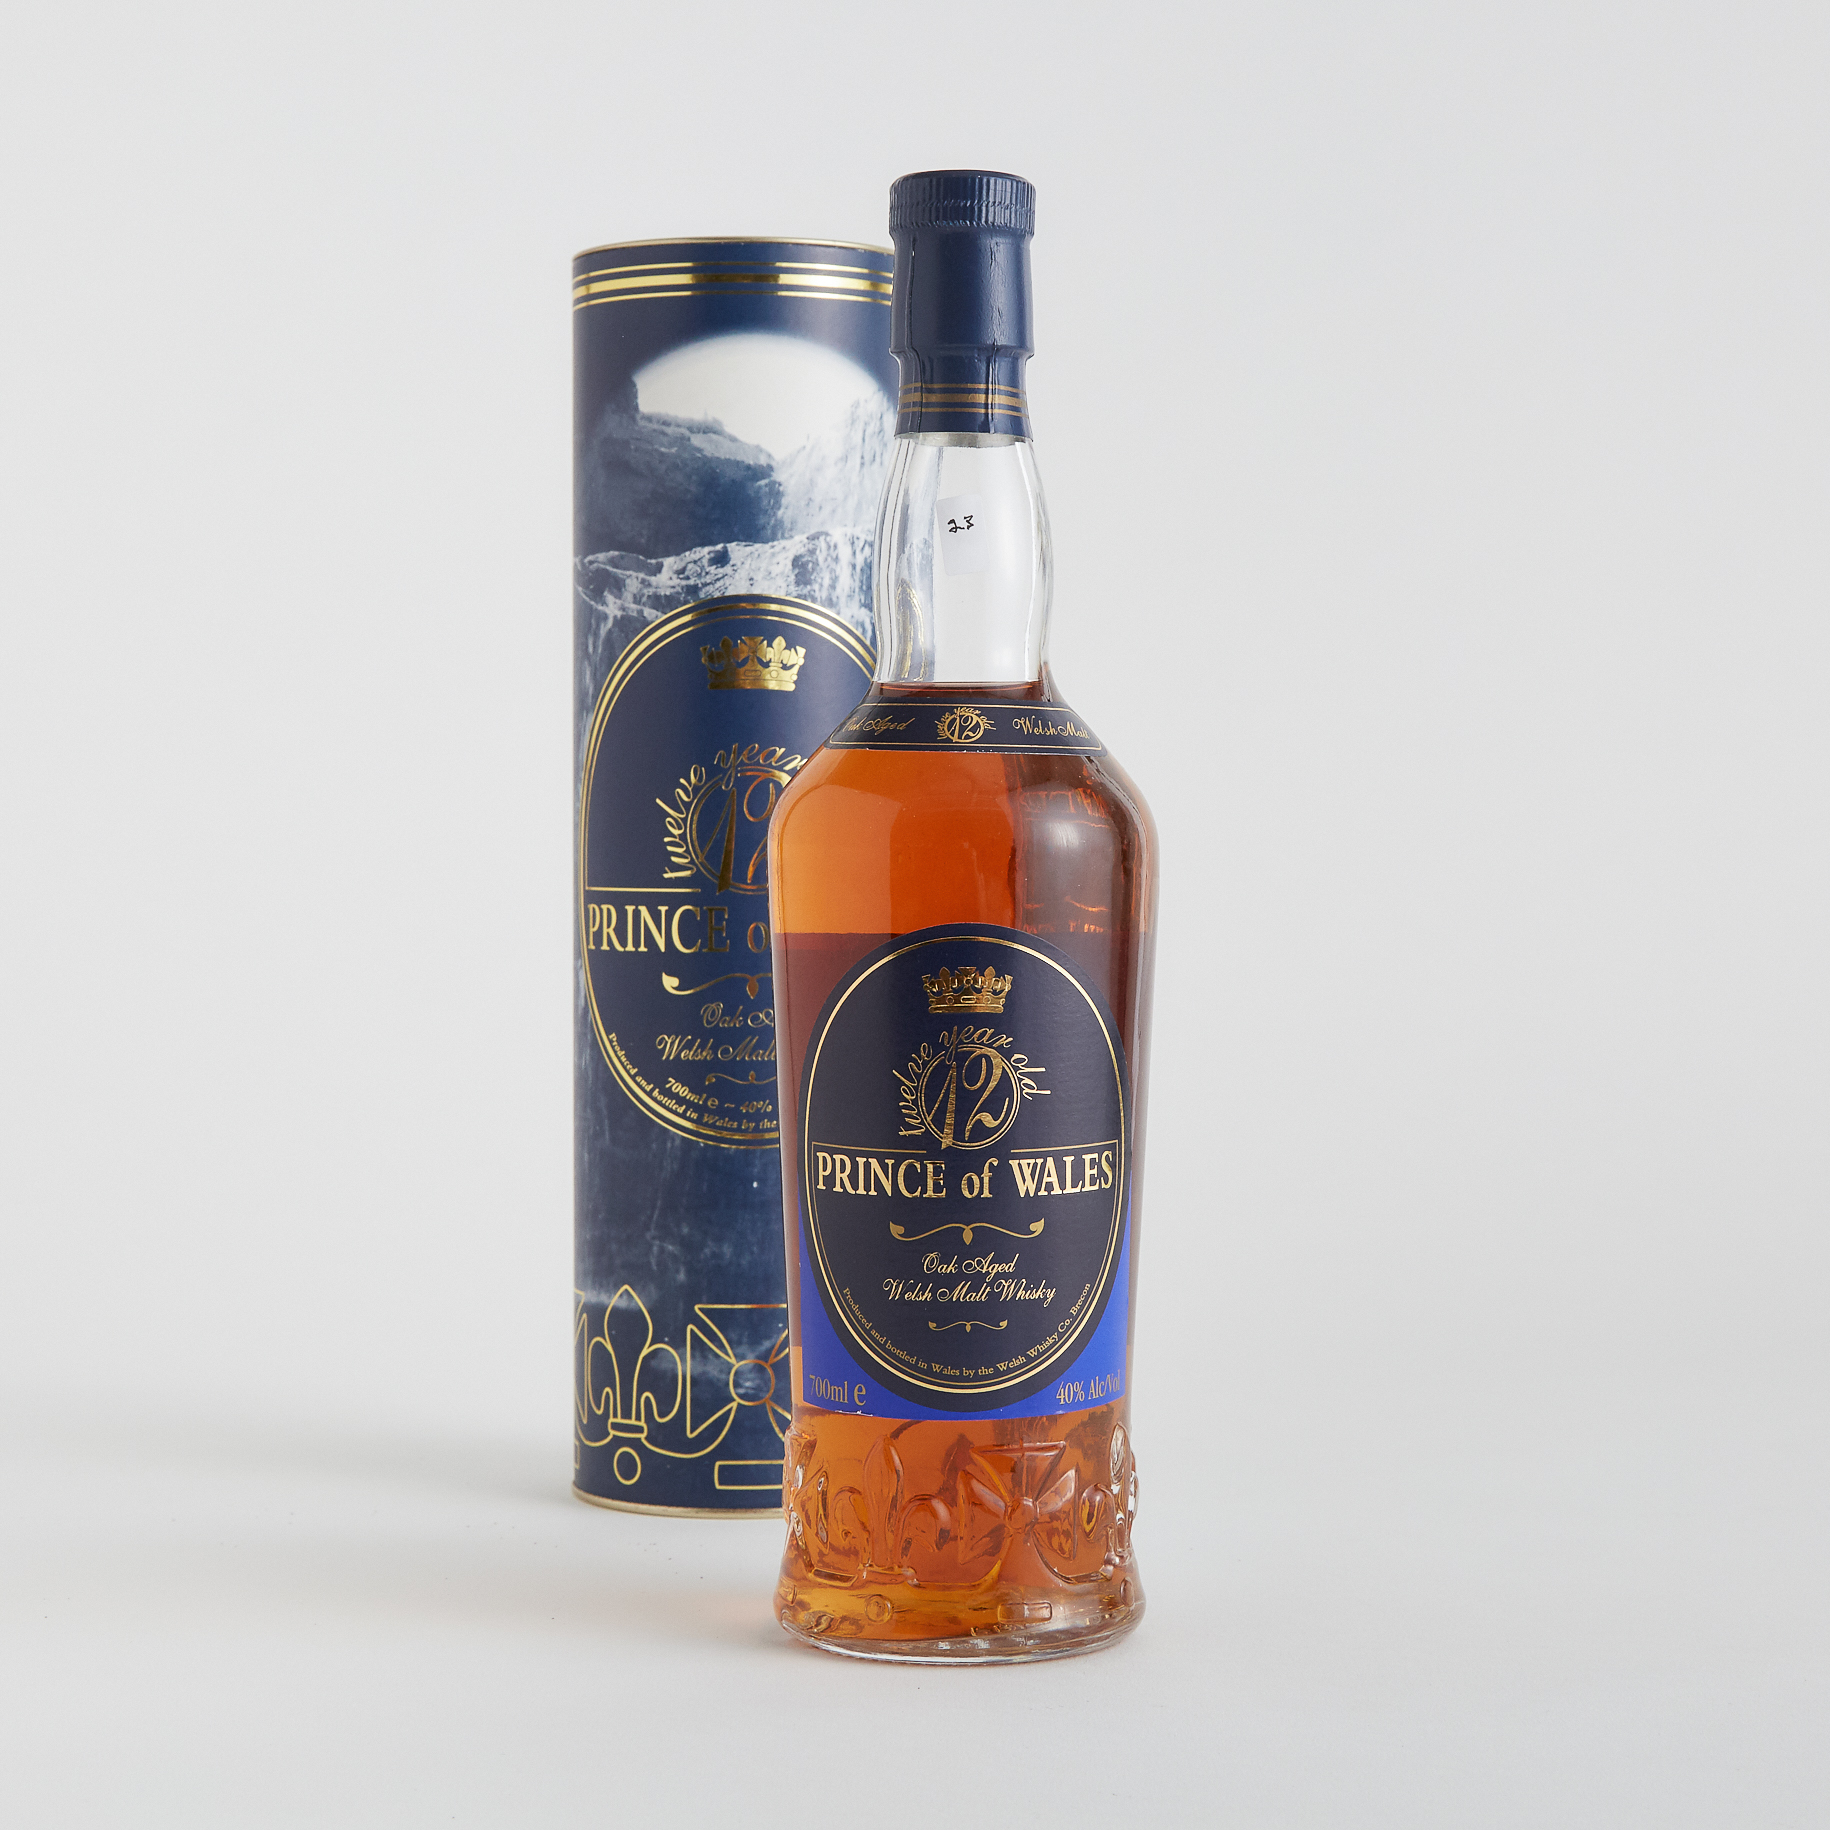 PRINCE OF WALES WELCH BLENDED MALT WHISKY 12 YEARS (ONE 700 ML)